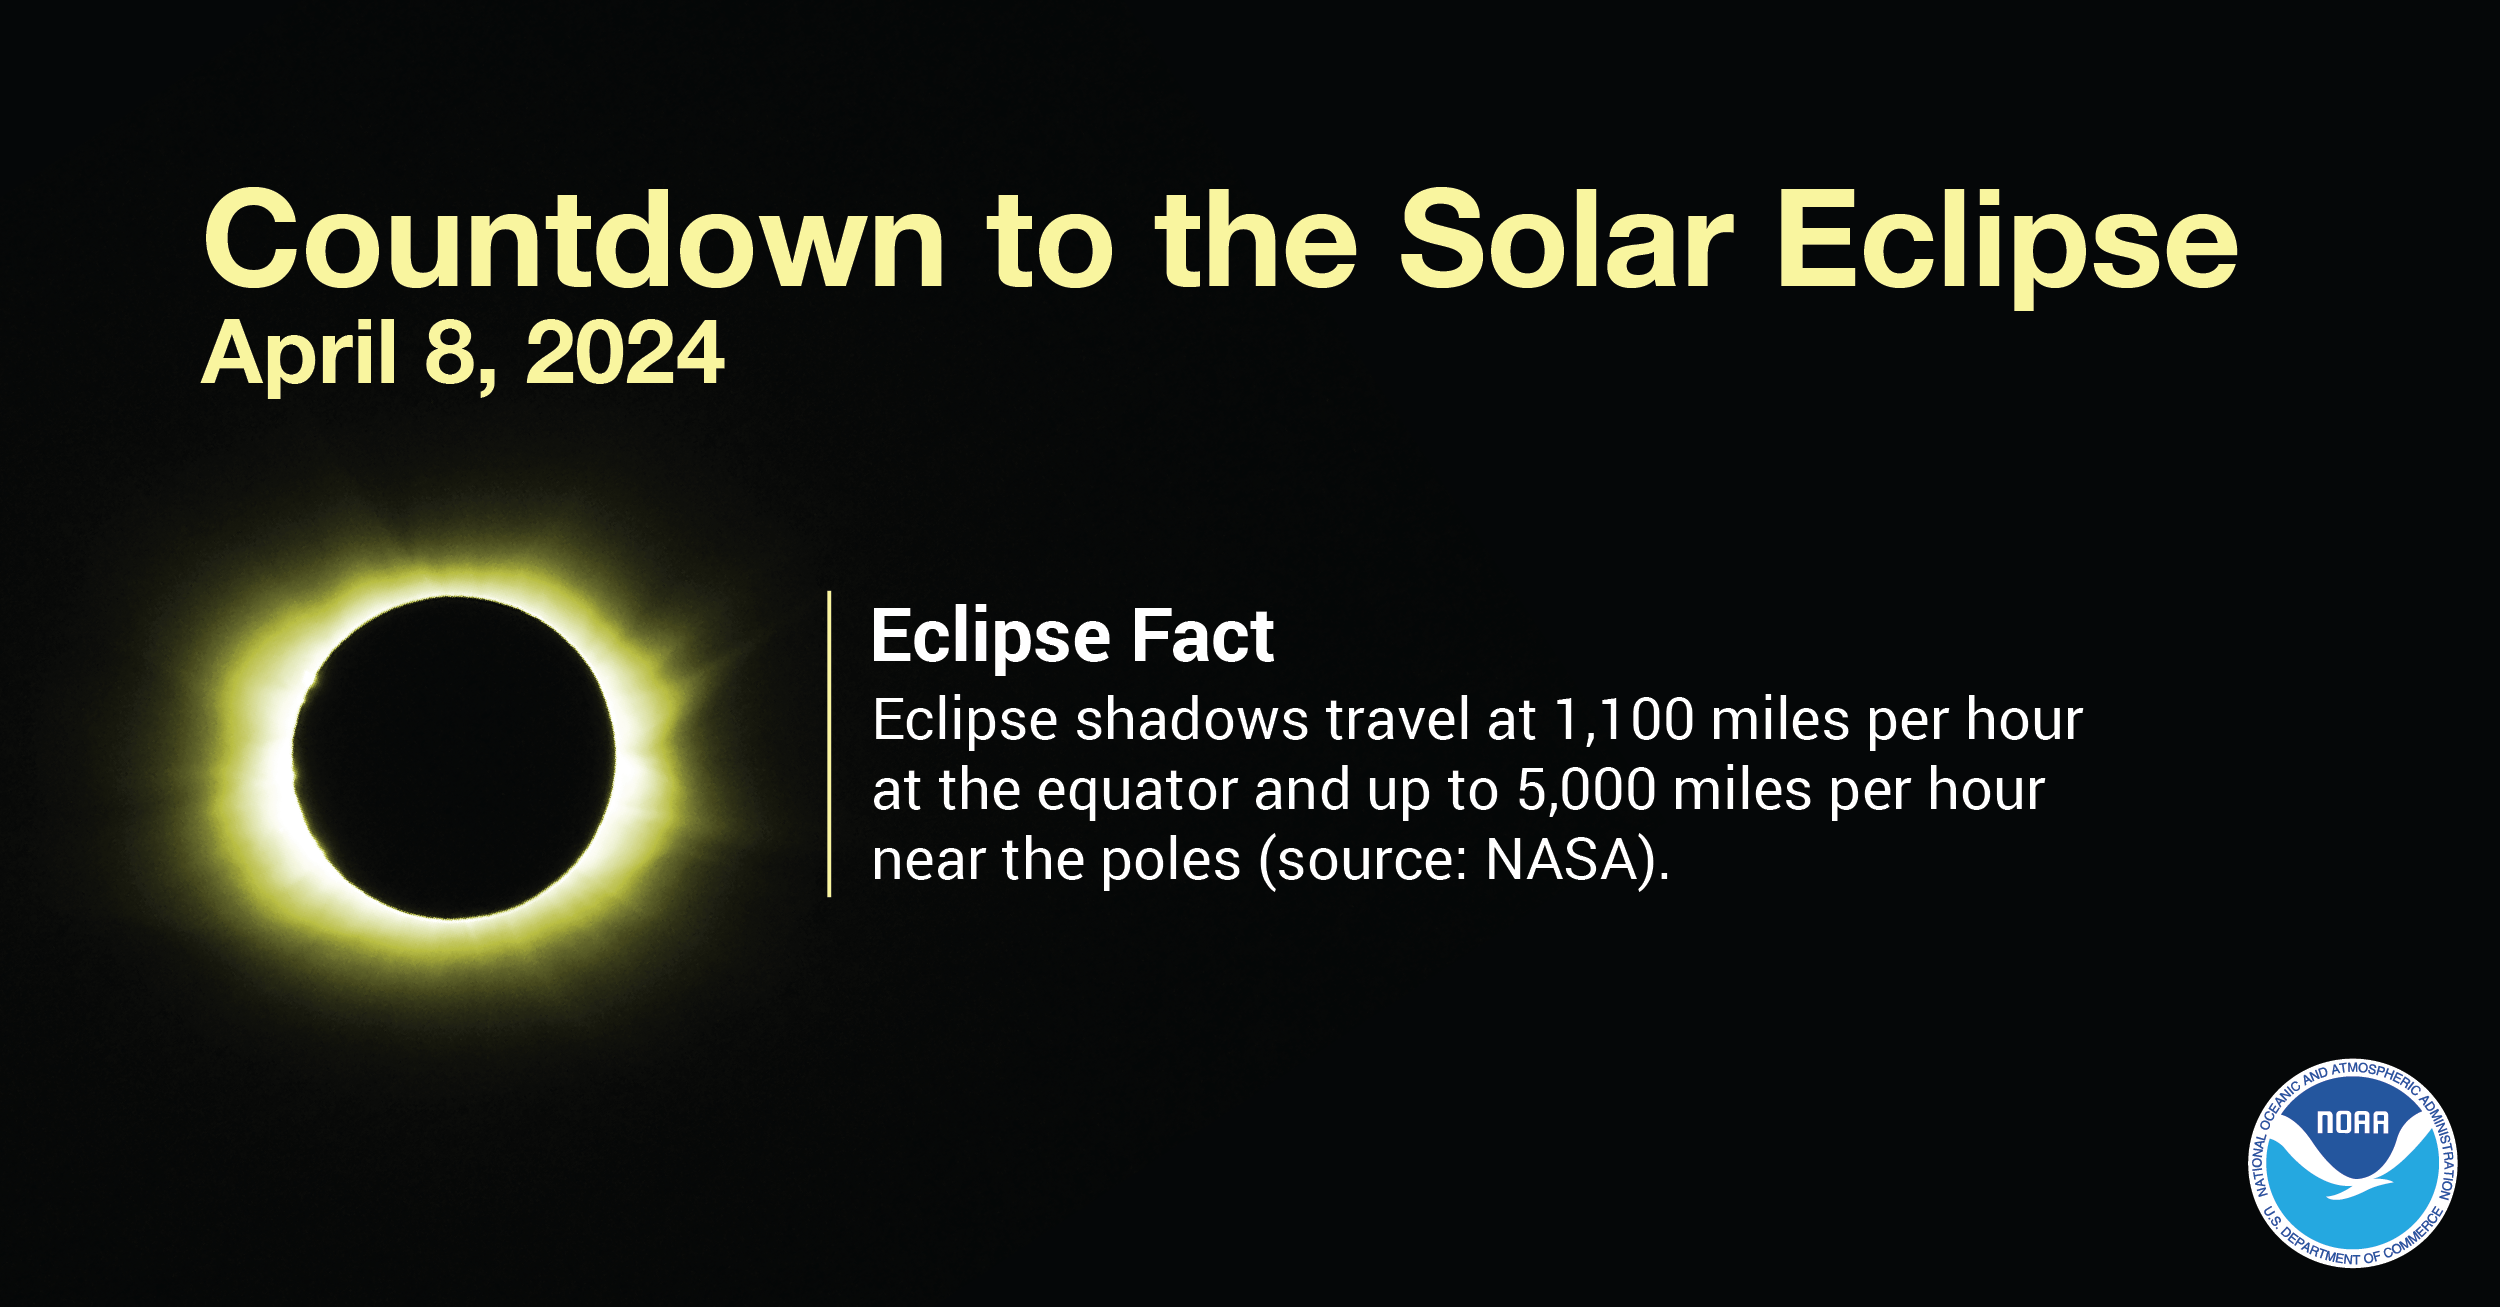 Eclipse Fact 3